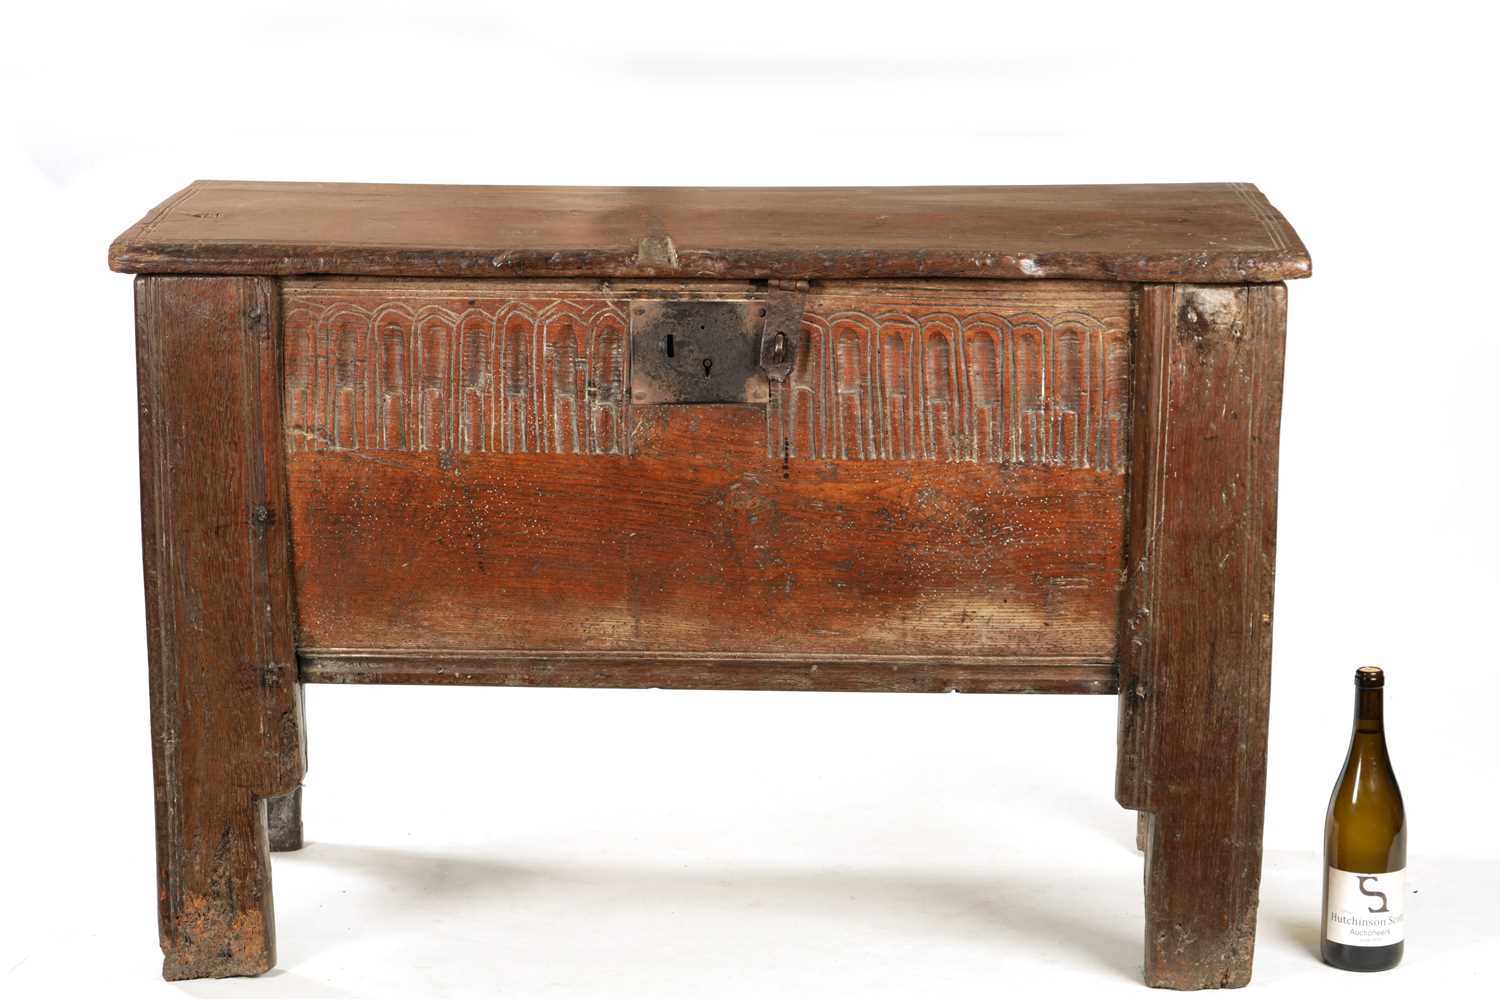 A RARE LATE 16TH CENTURY WELSH OAK BOARDED CHEST - Image 2 of 6